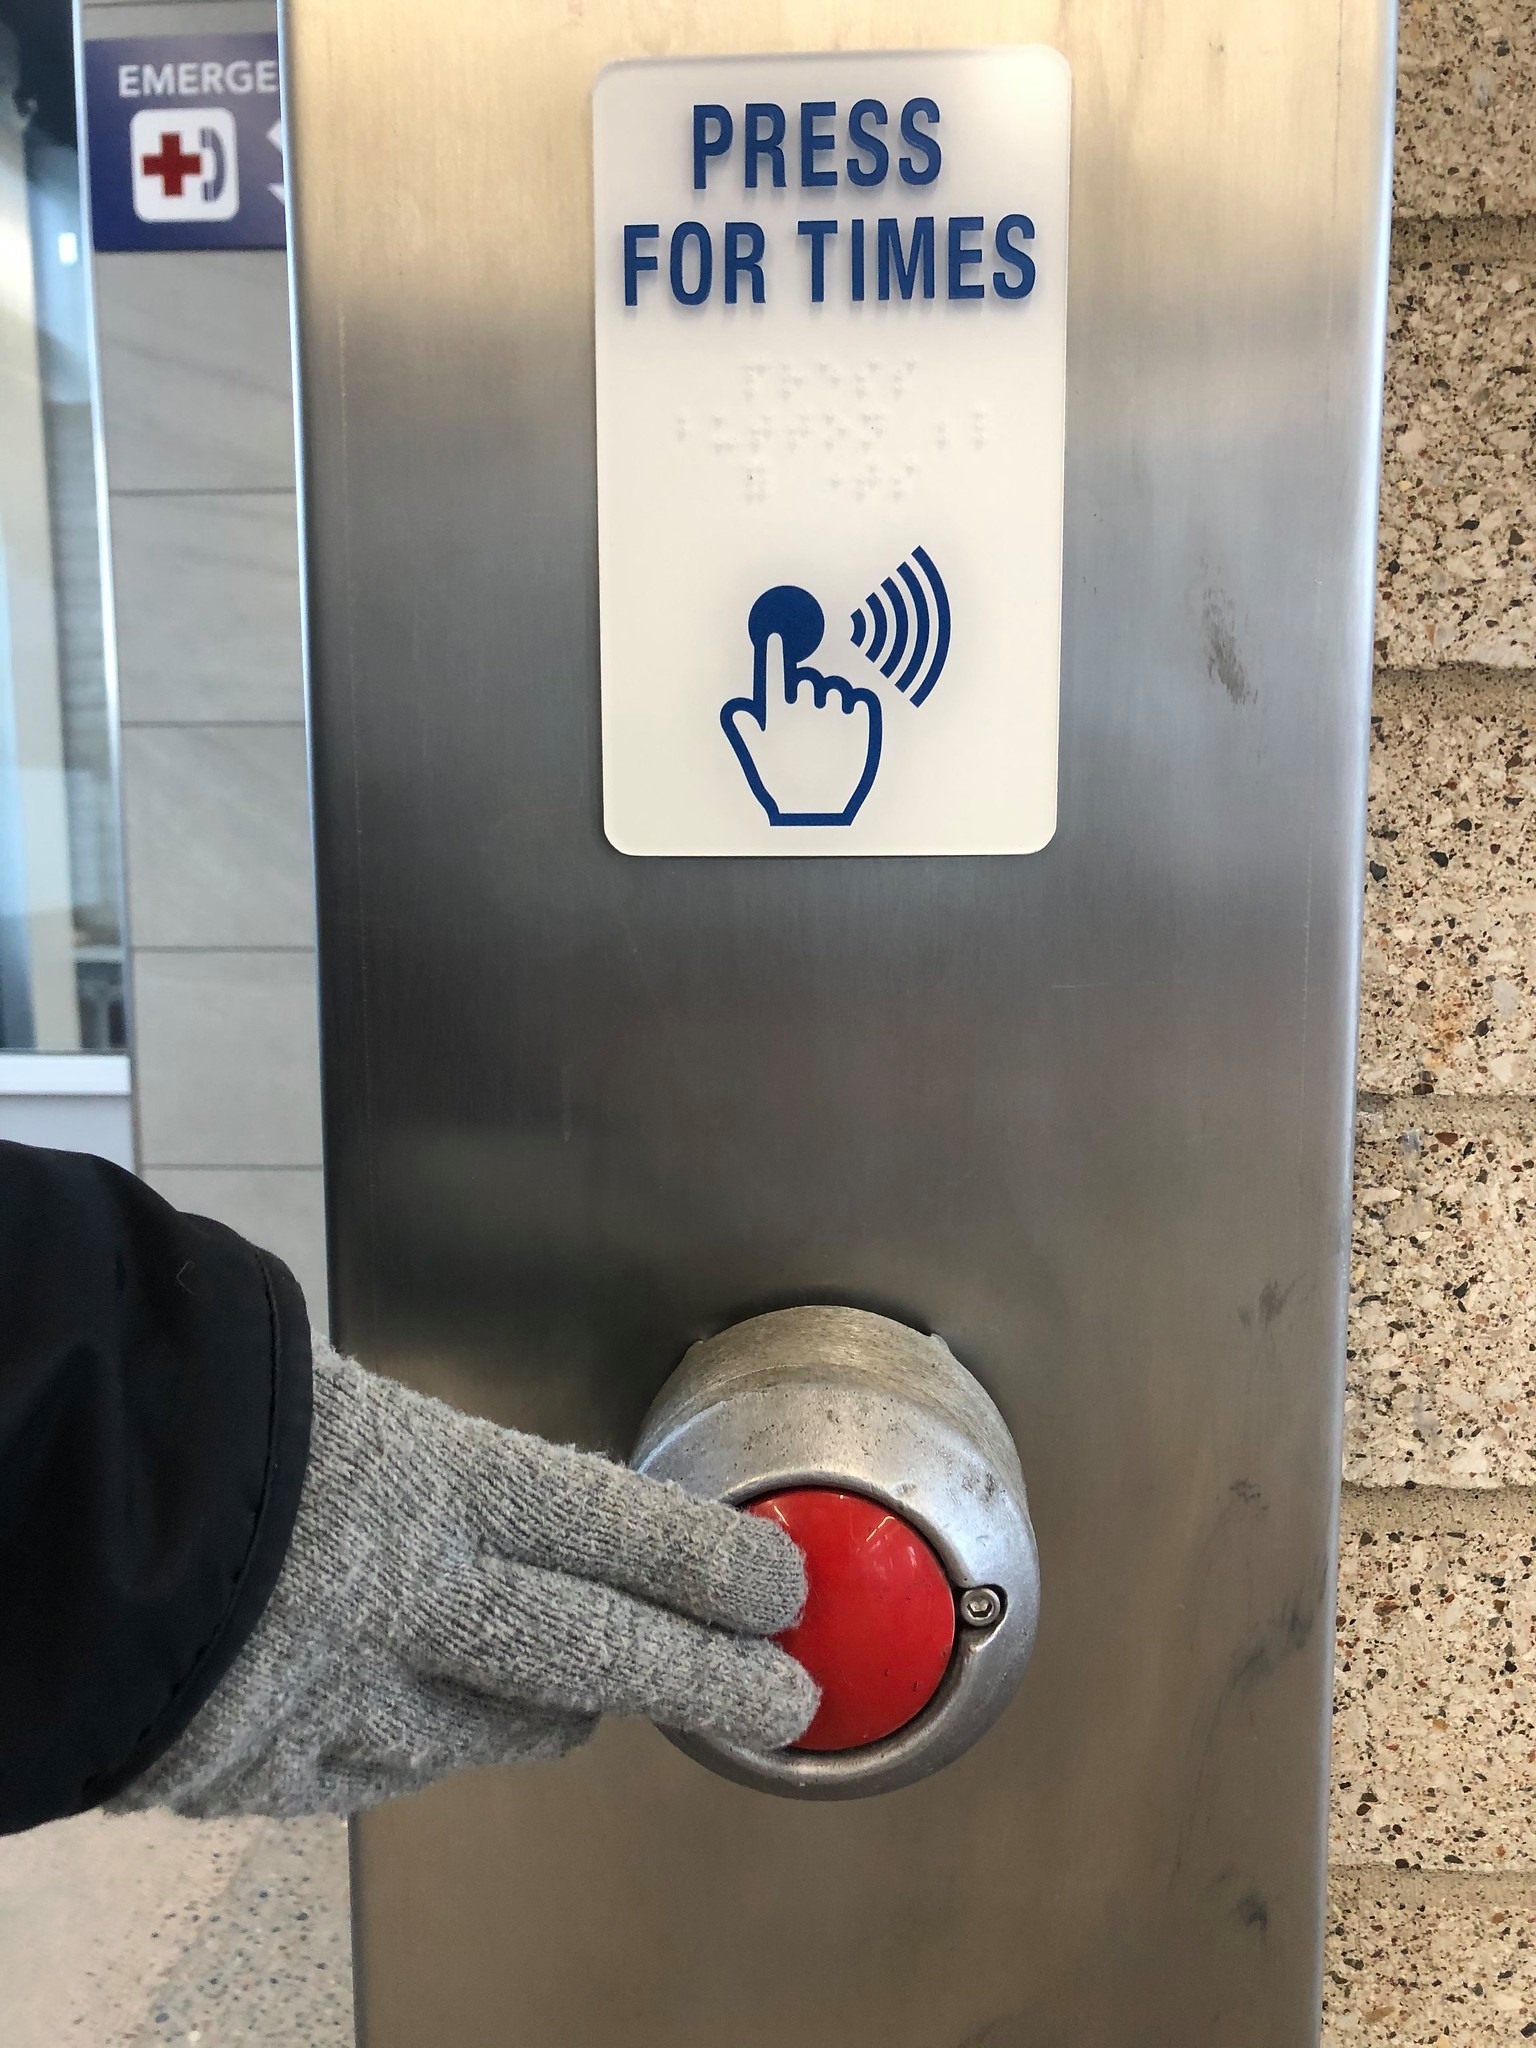 Audio times are available by push-button at Brooklyn Center Transit Center